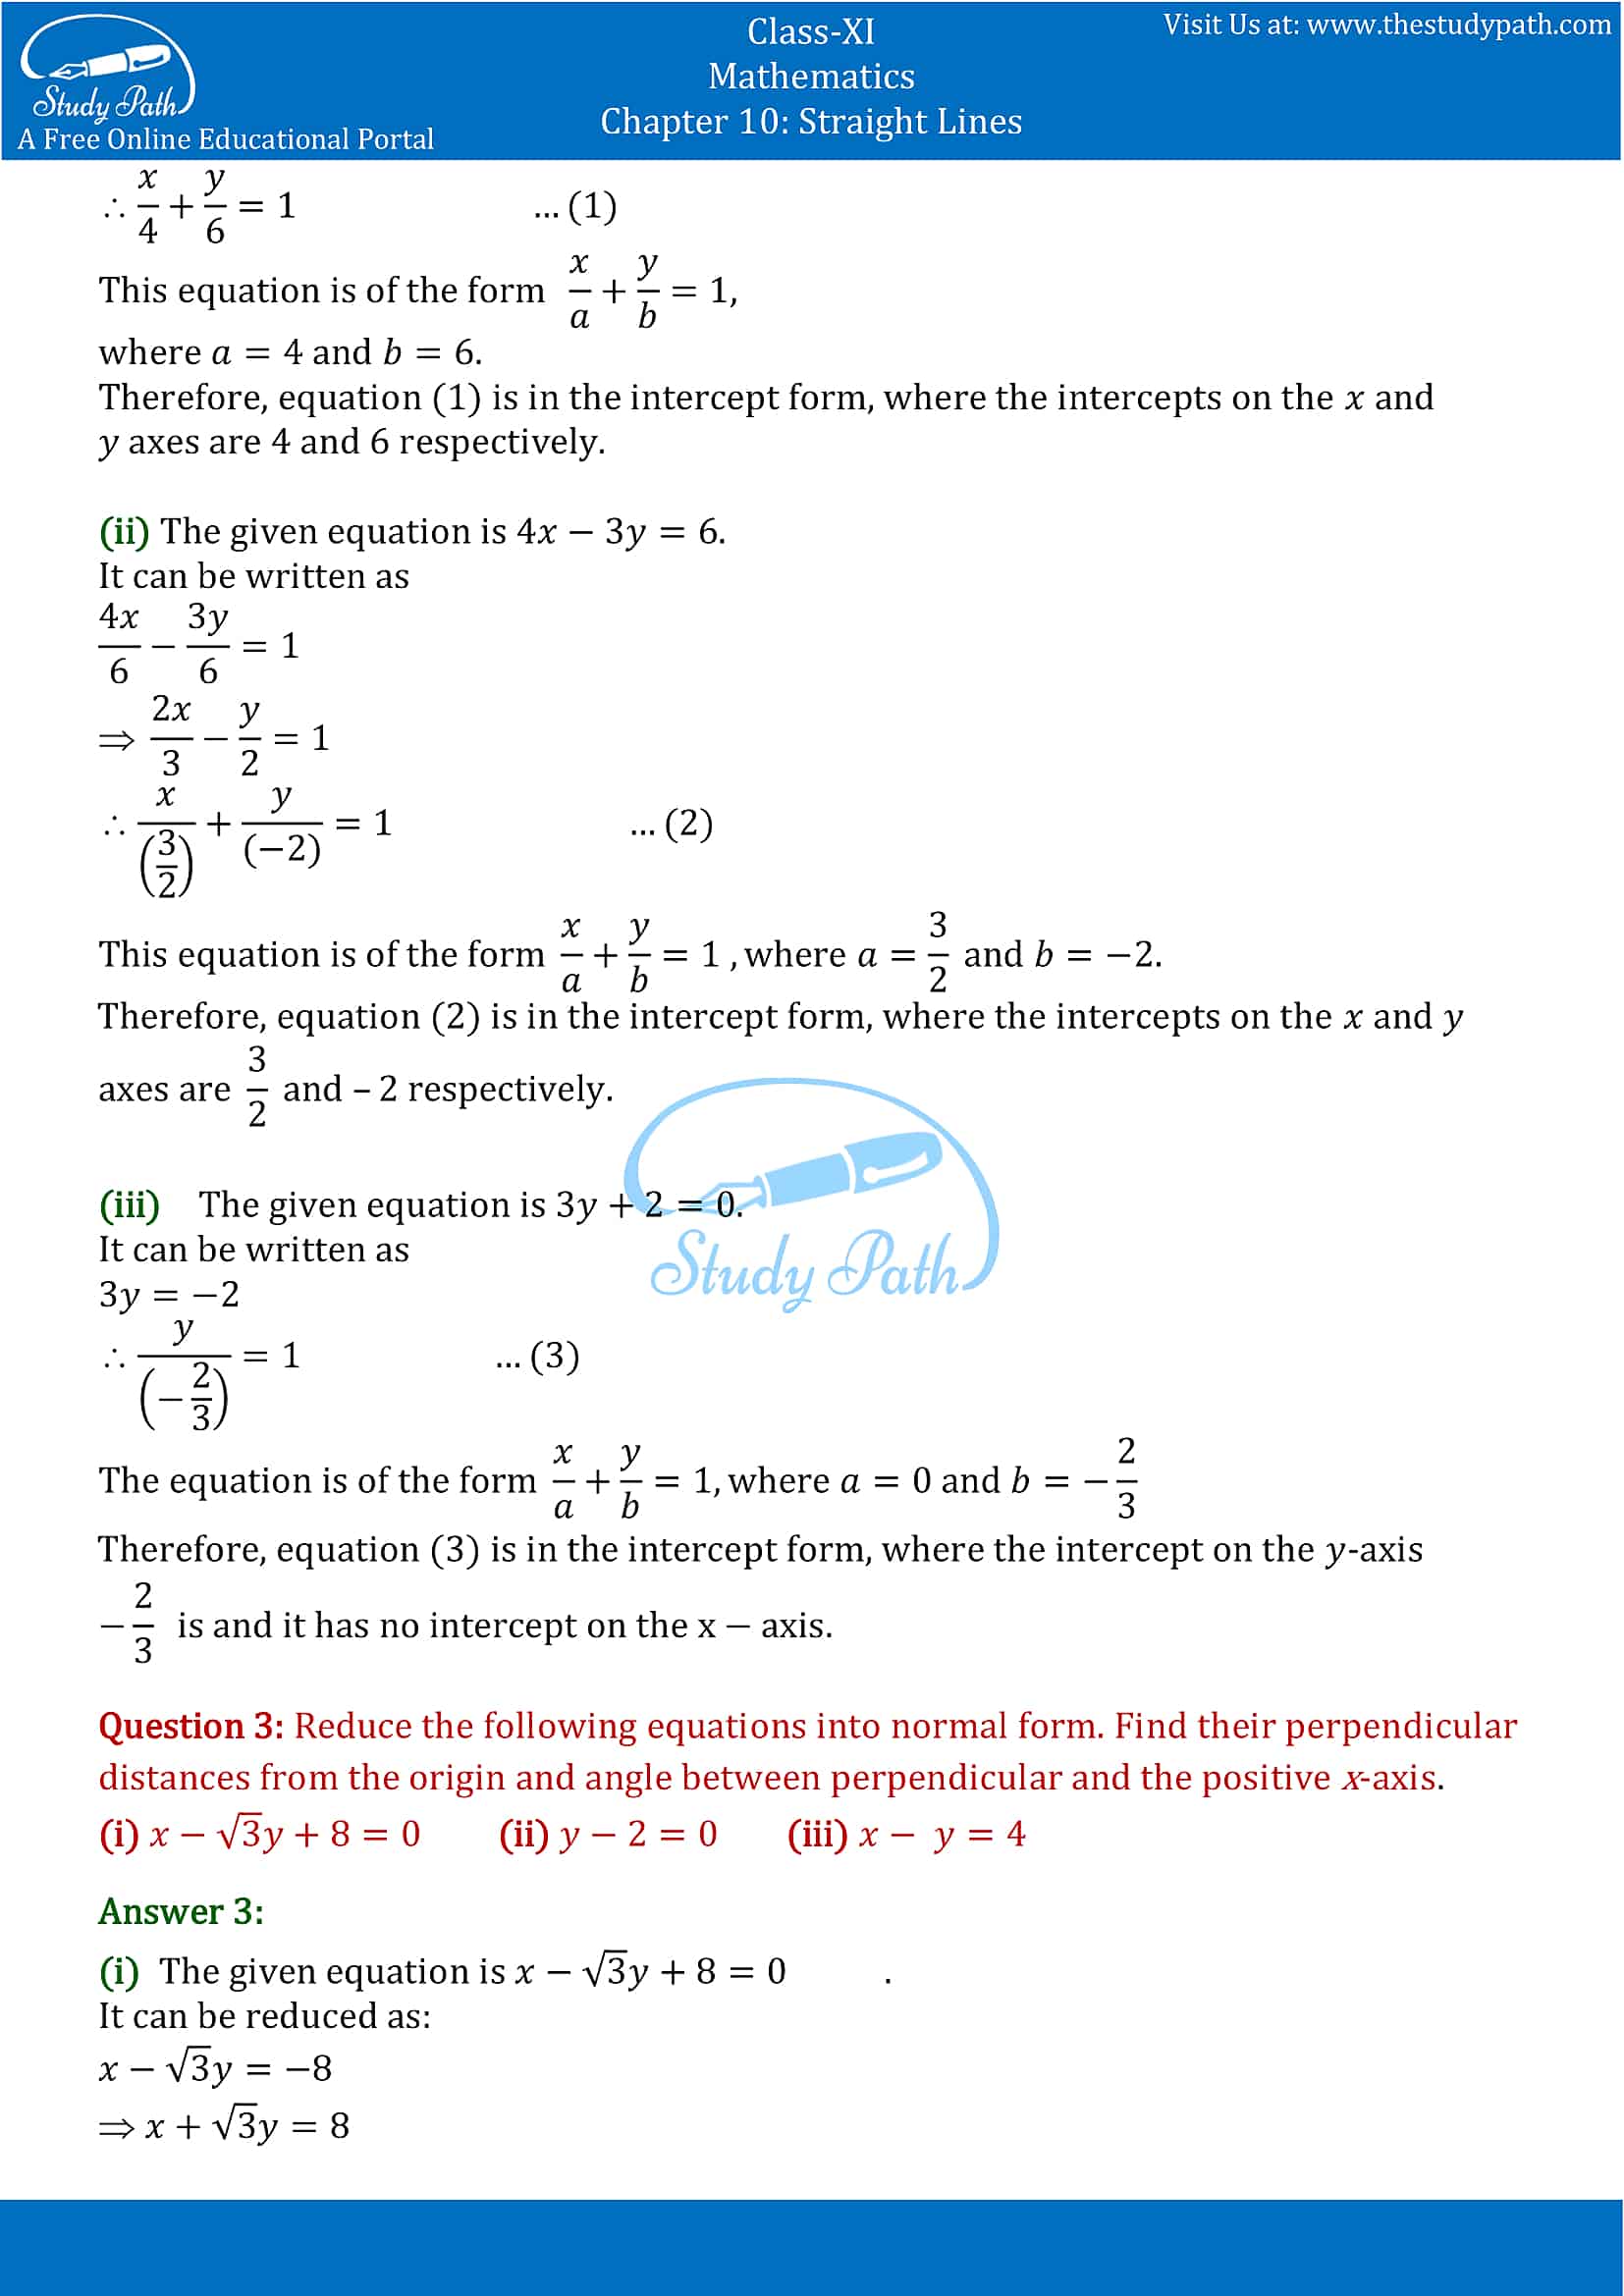 NCERT Solutions for Class 11 Maths chapter 10 Straight Lines Exercise 10.3 part-2